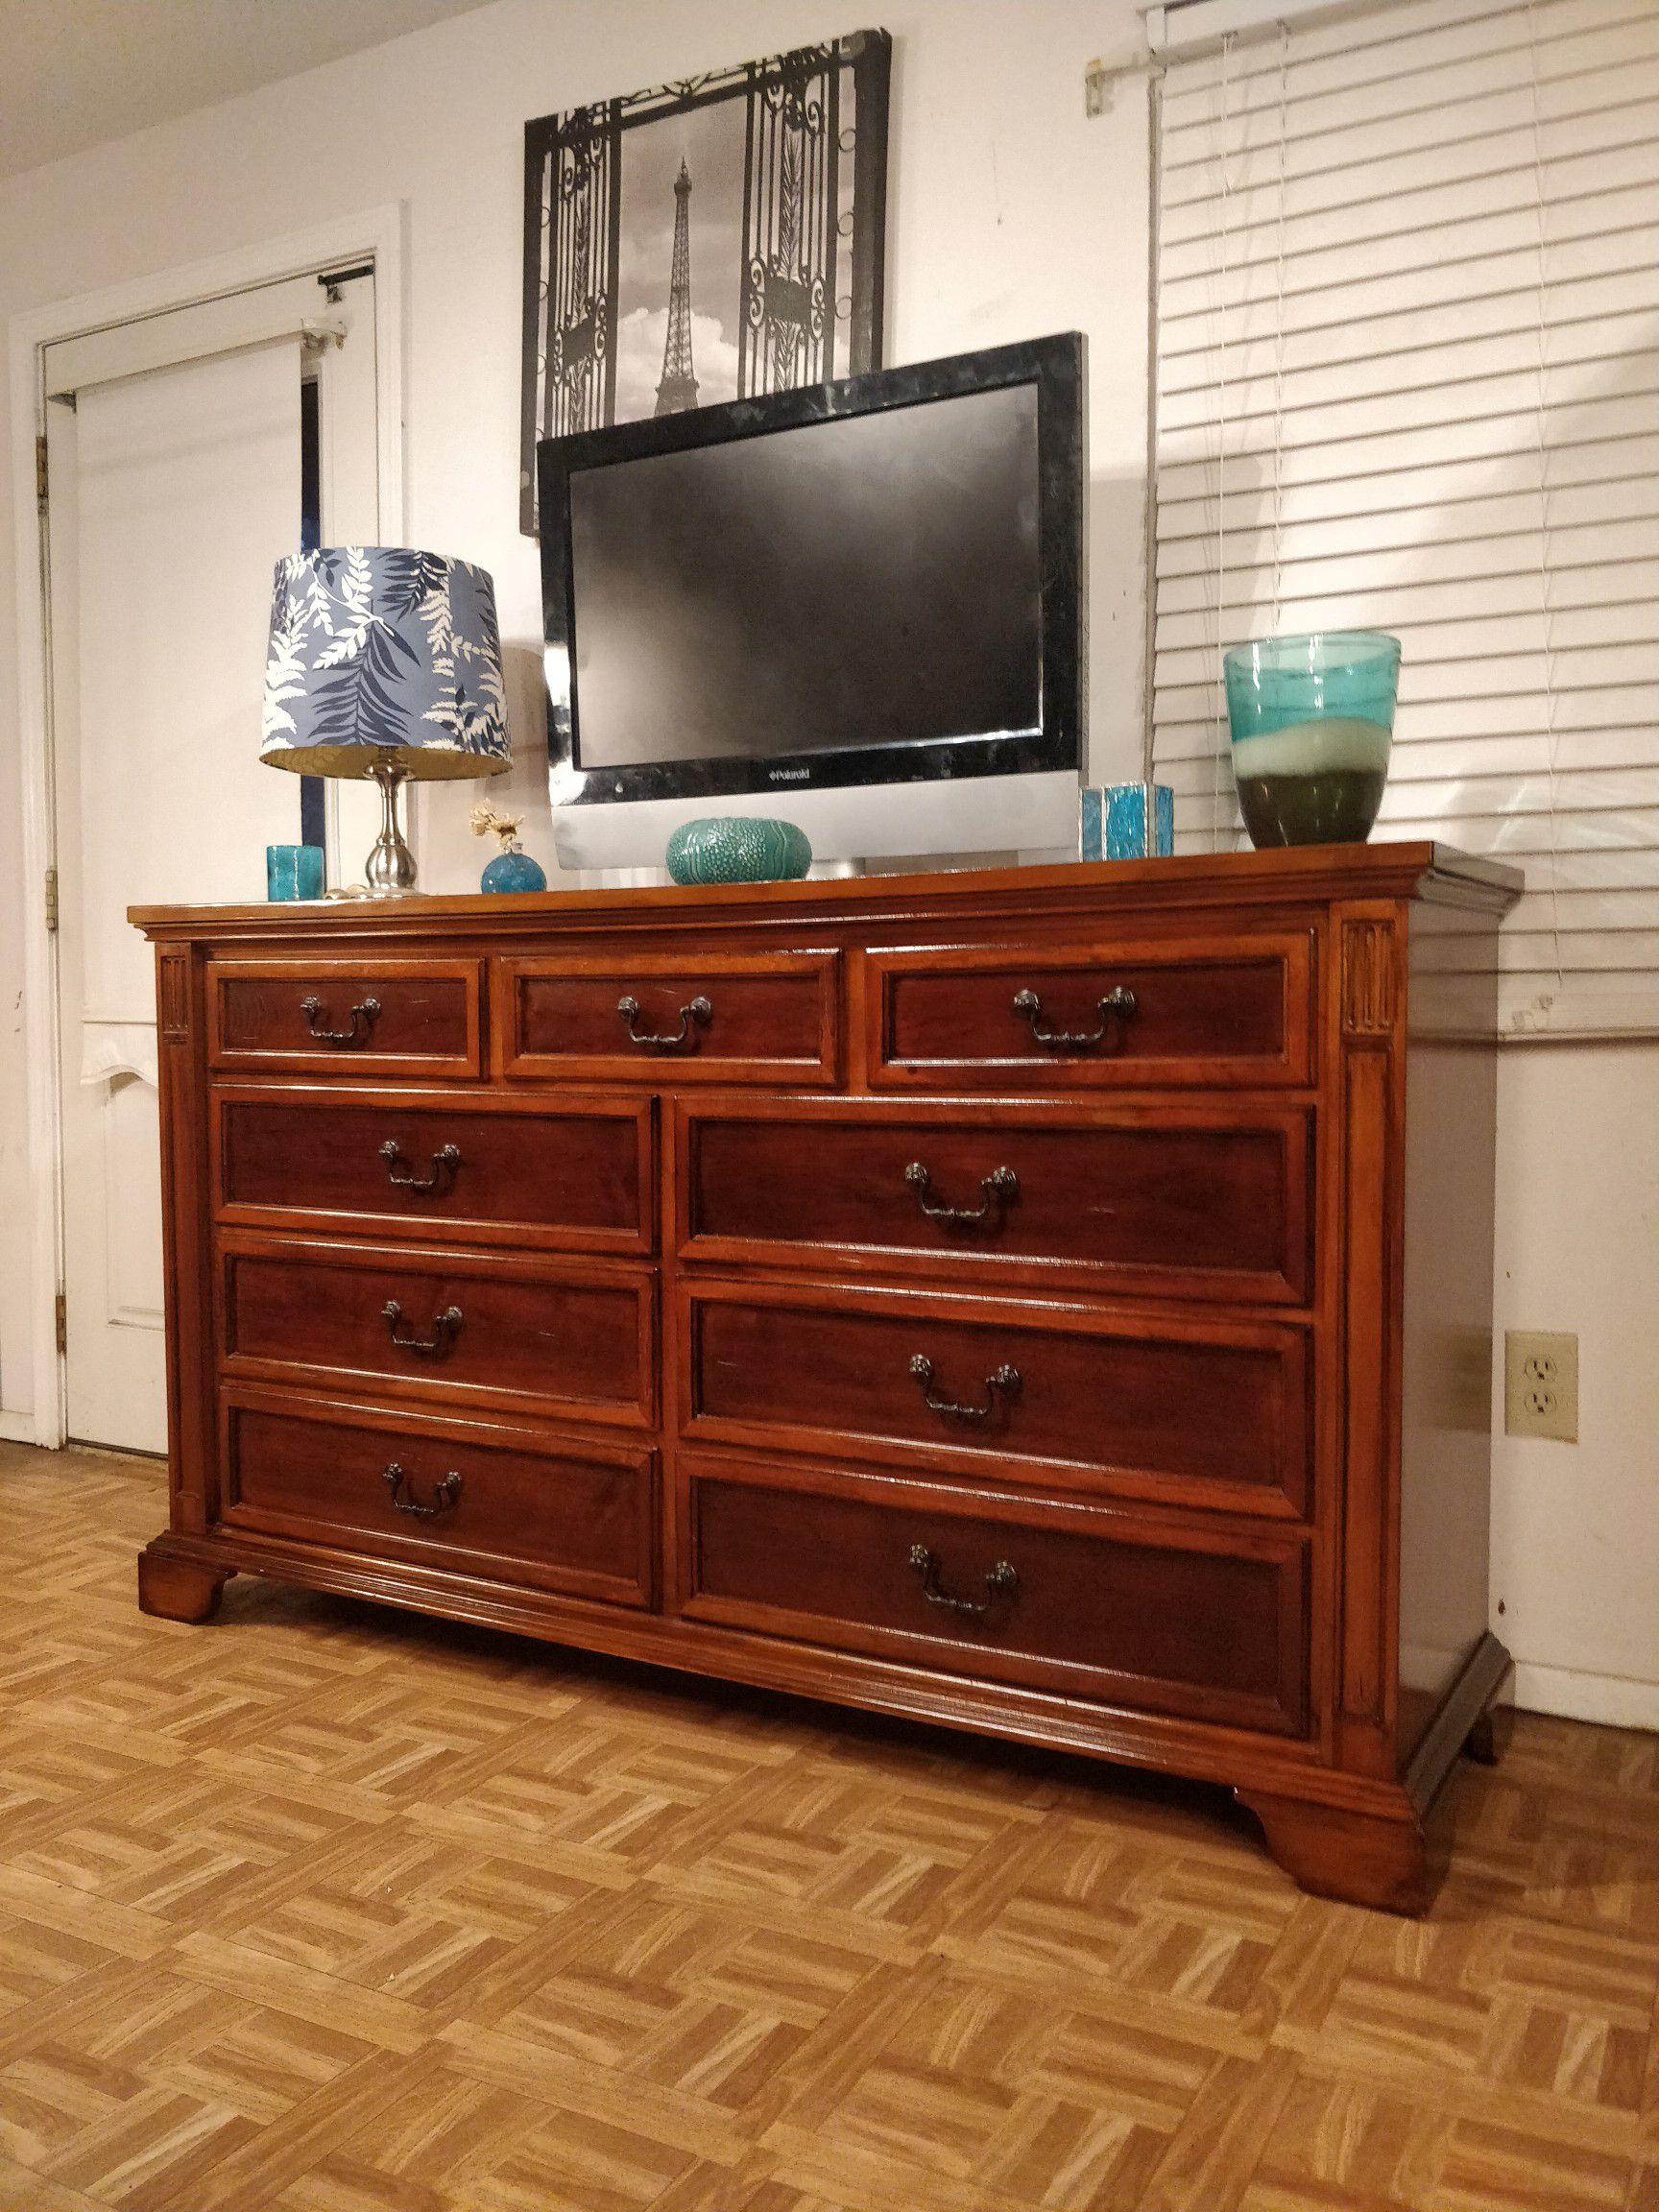 Solid wood UNIVERSAL FURNITURE big dresser/TV stand with 9 drawers in great condition all drawers working well, dovetail drawers, ,